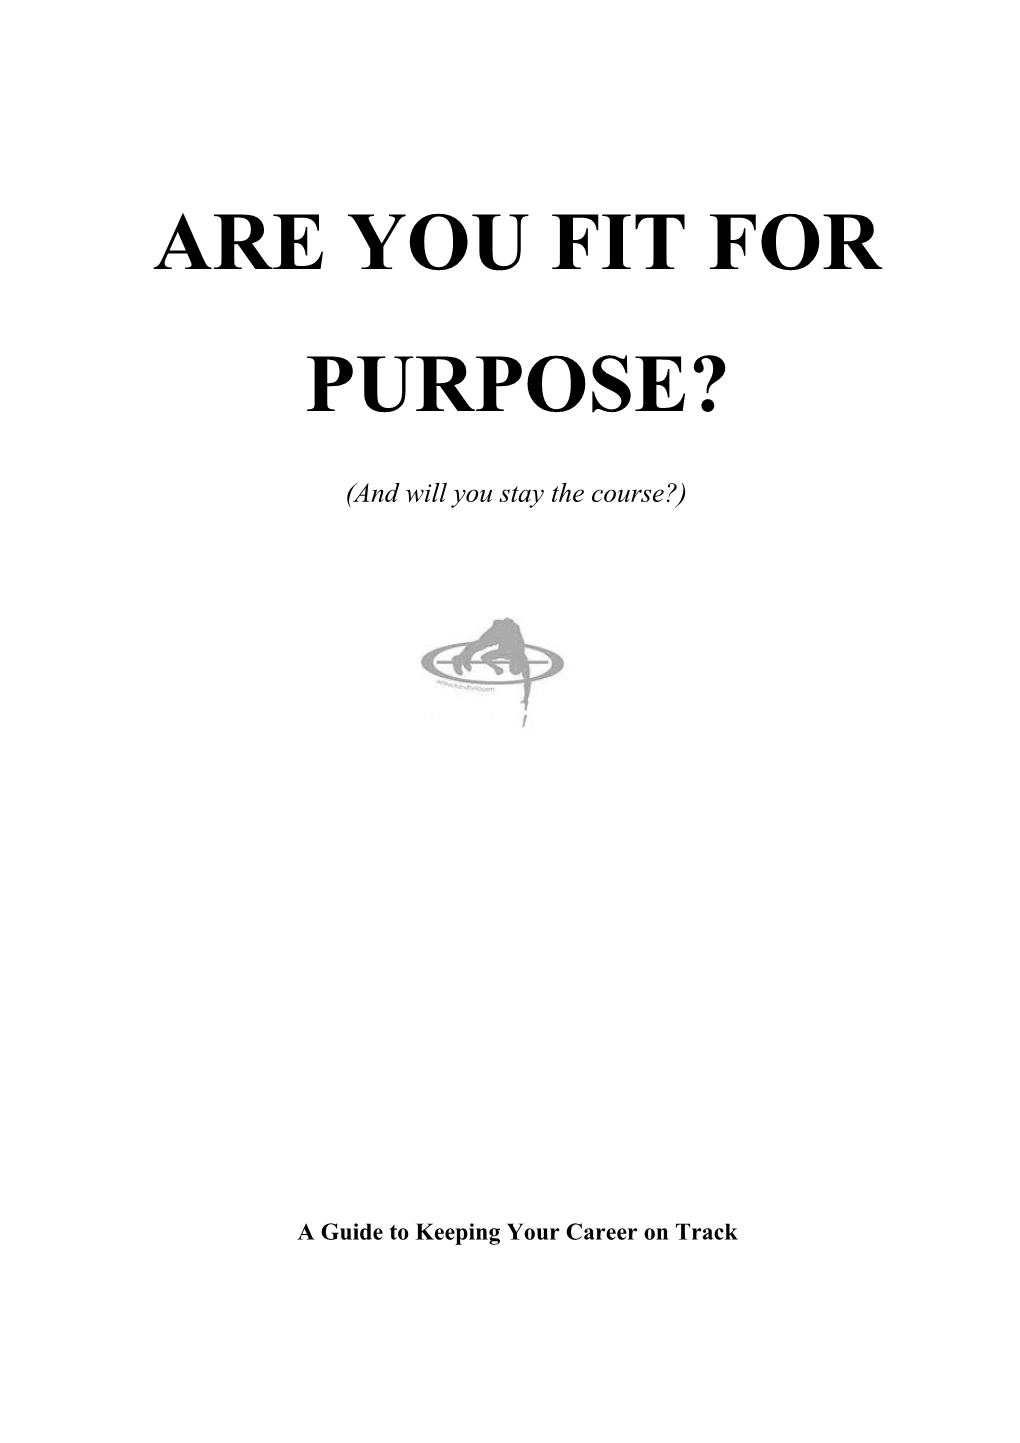 Are You Fit for Purpose